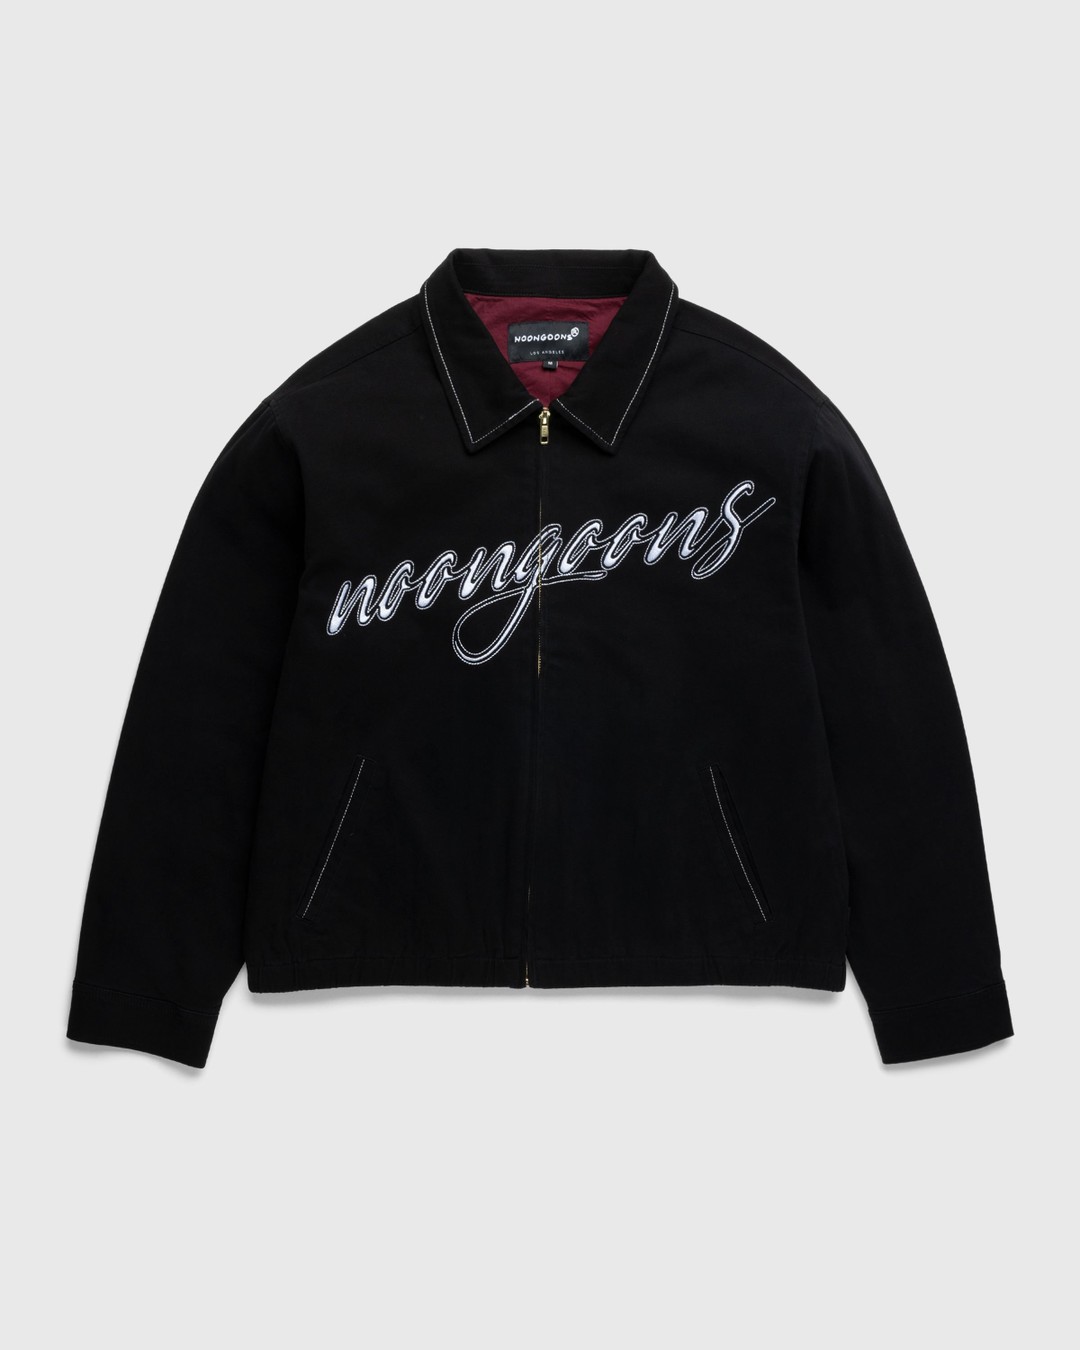 Noon Goons – Stitched Up Jacket Black - Outerwear - Black - Image 1